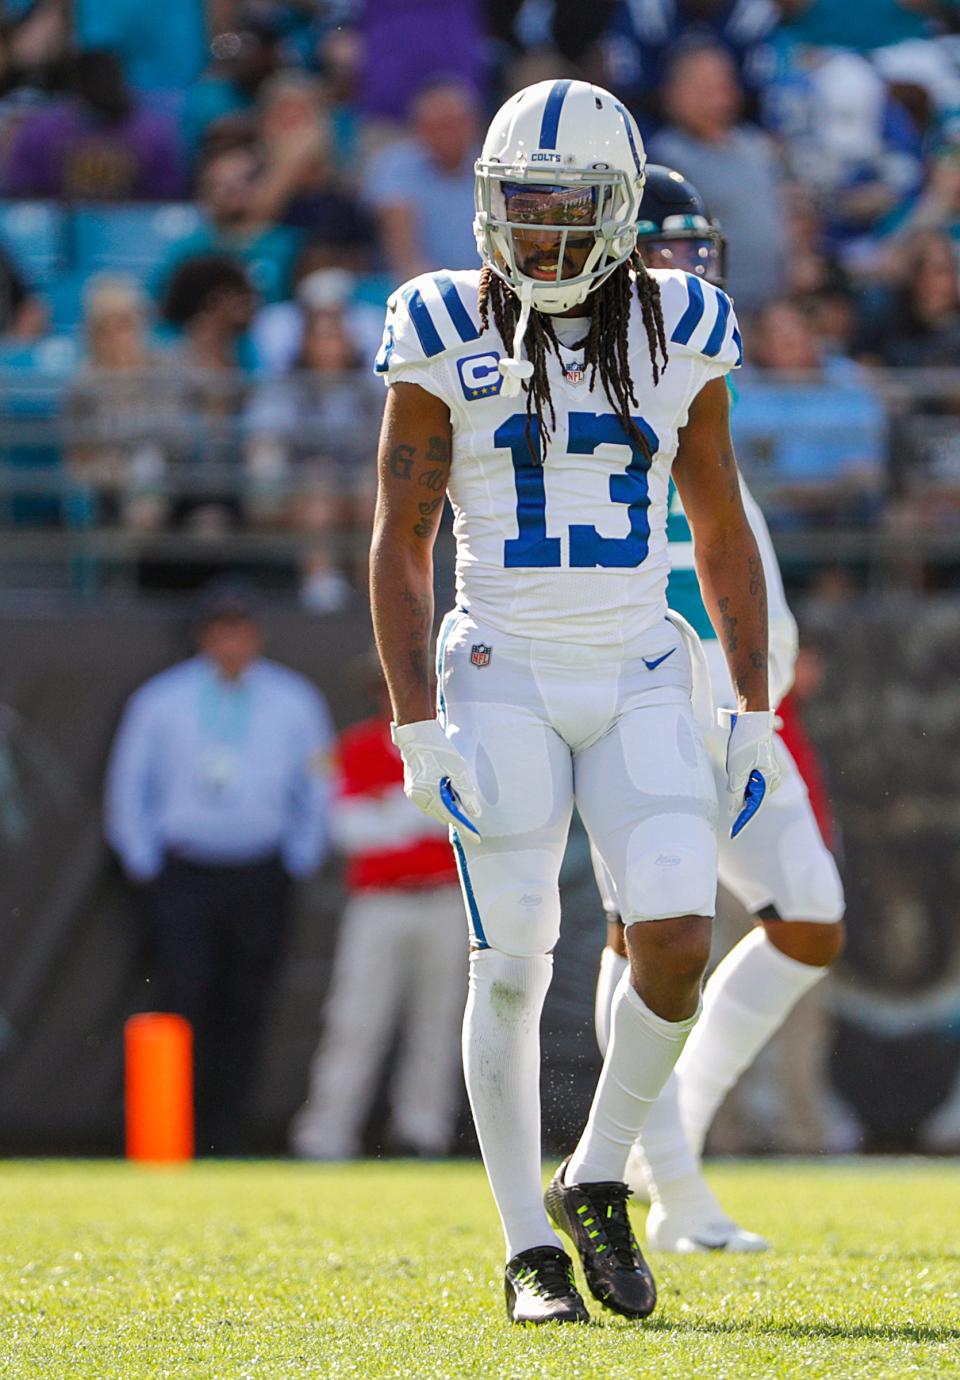 T.Y. Hilton remains an option for the Indianapolis Colts to re-sign if they decide they don't have enough proven options at wide receiver.